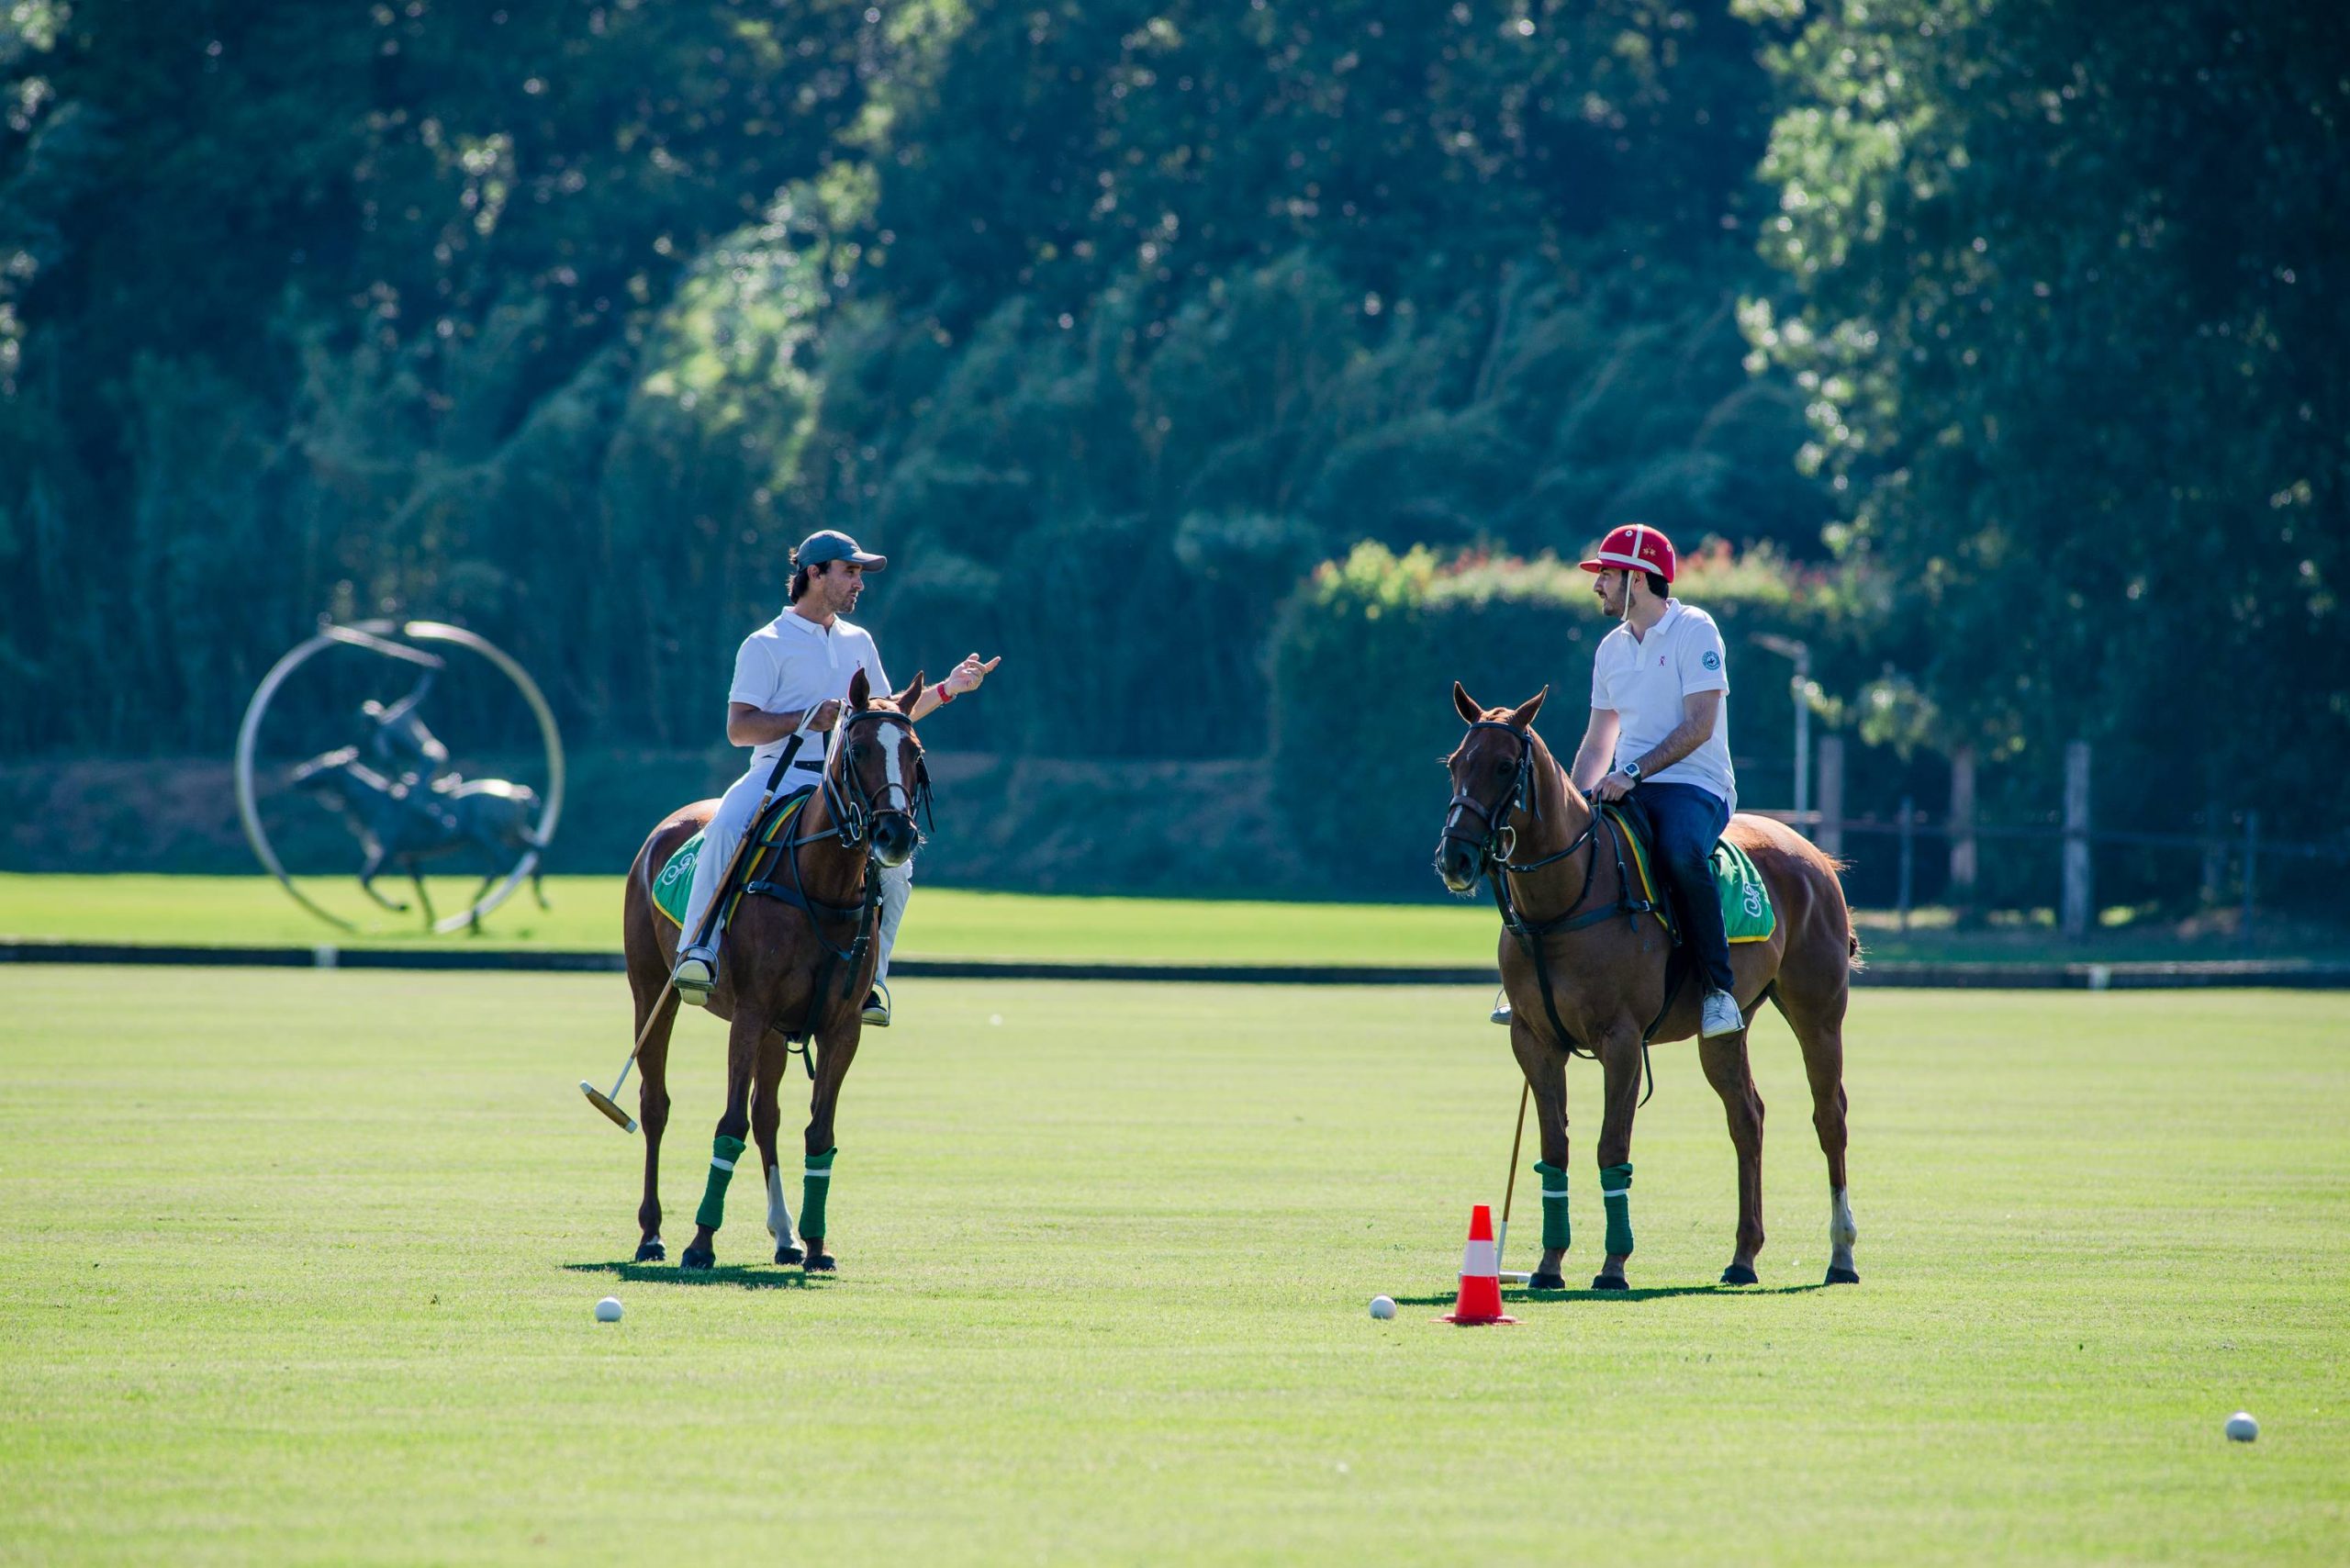 Up Close And Personal With Pablo Mac Donough, Polo’s Bright Star